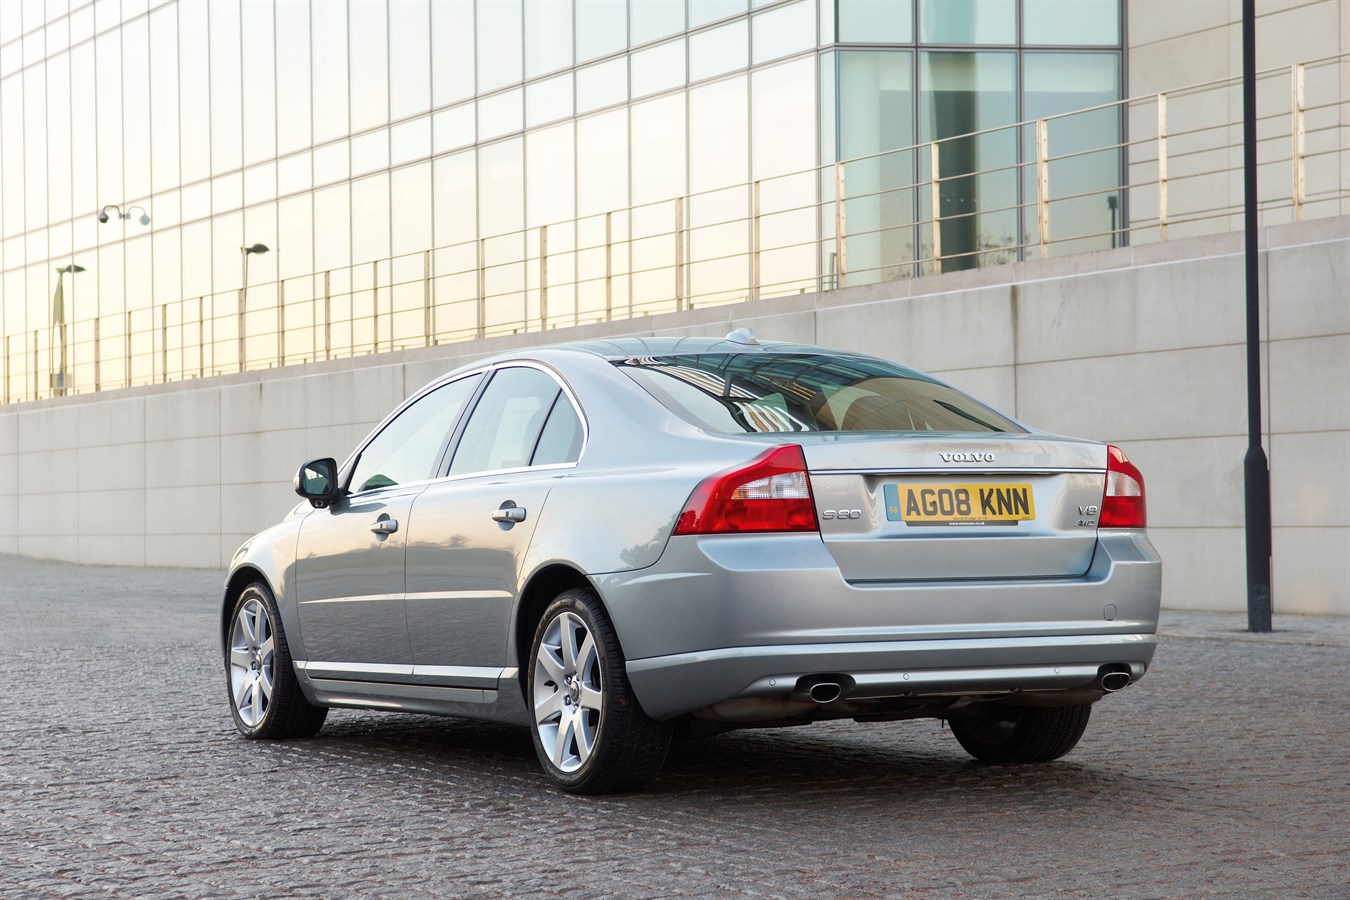 Volvo's New Euro 5 D5 Diesel Engine Offers Increased Performance And Lower Fuel Consumption - Volvo Car Uk Media Newsroom